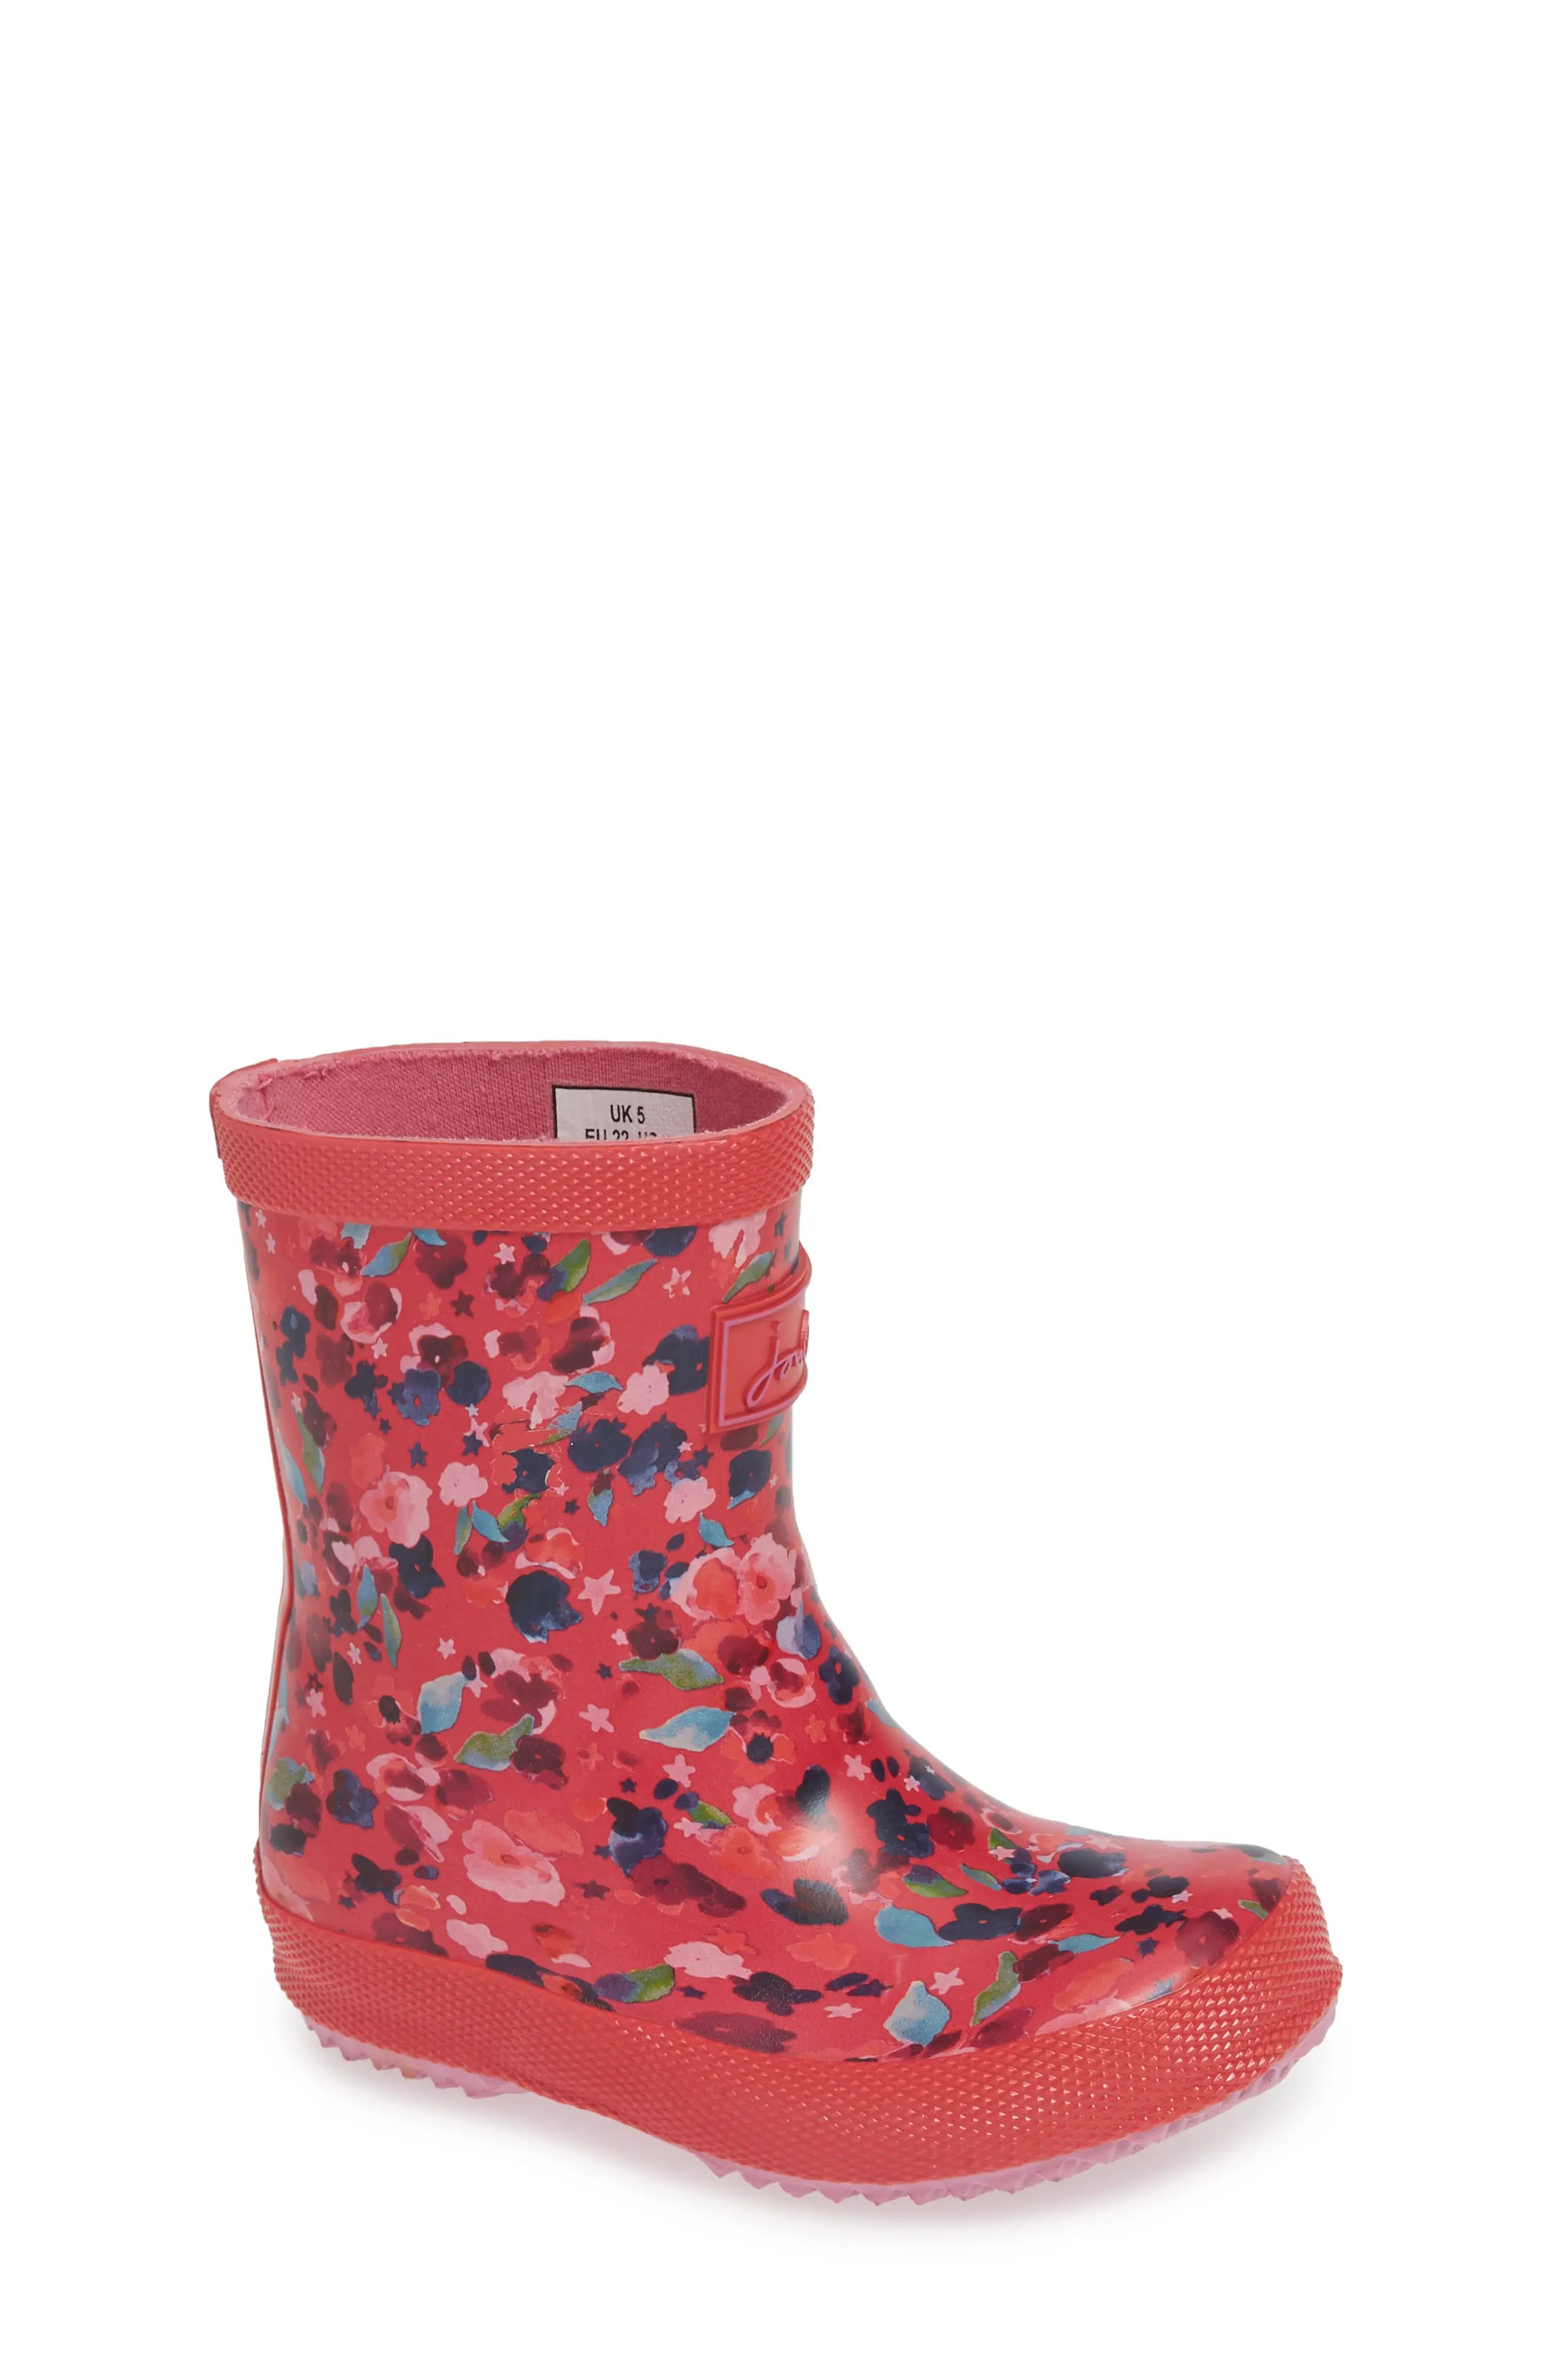 Toddler Girl's Joules Baby Welly Print Waterproof Boot | Nordstrom